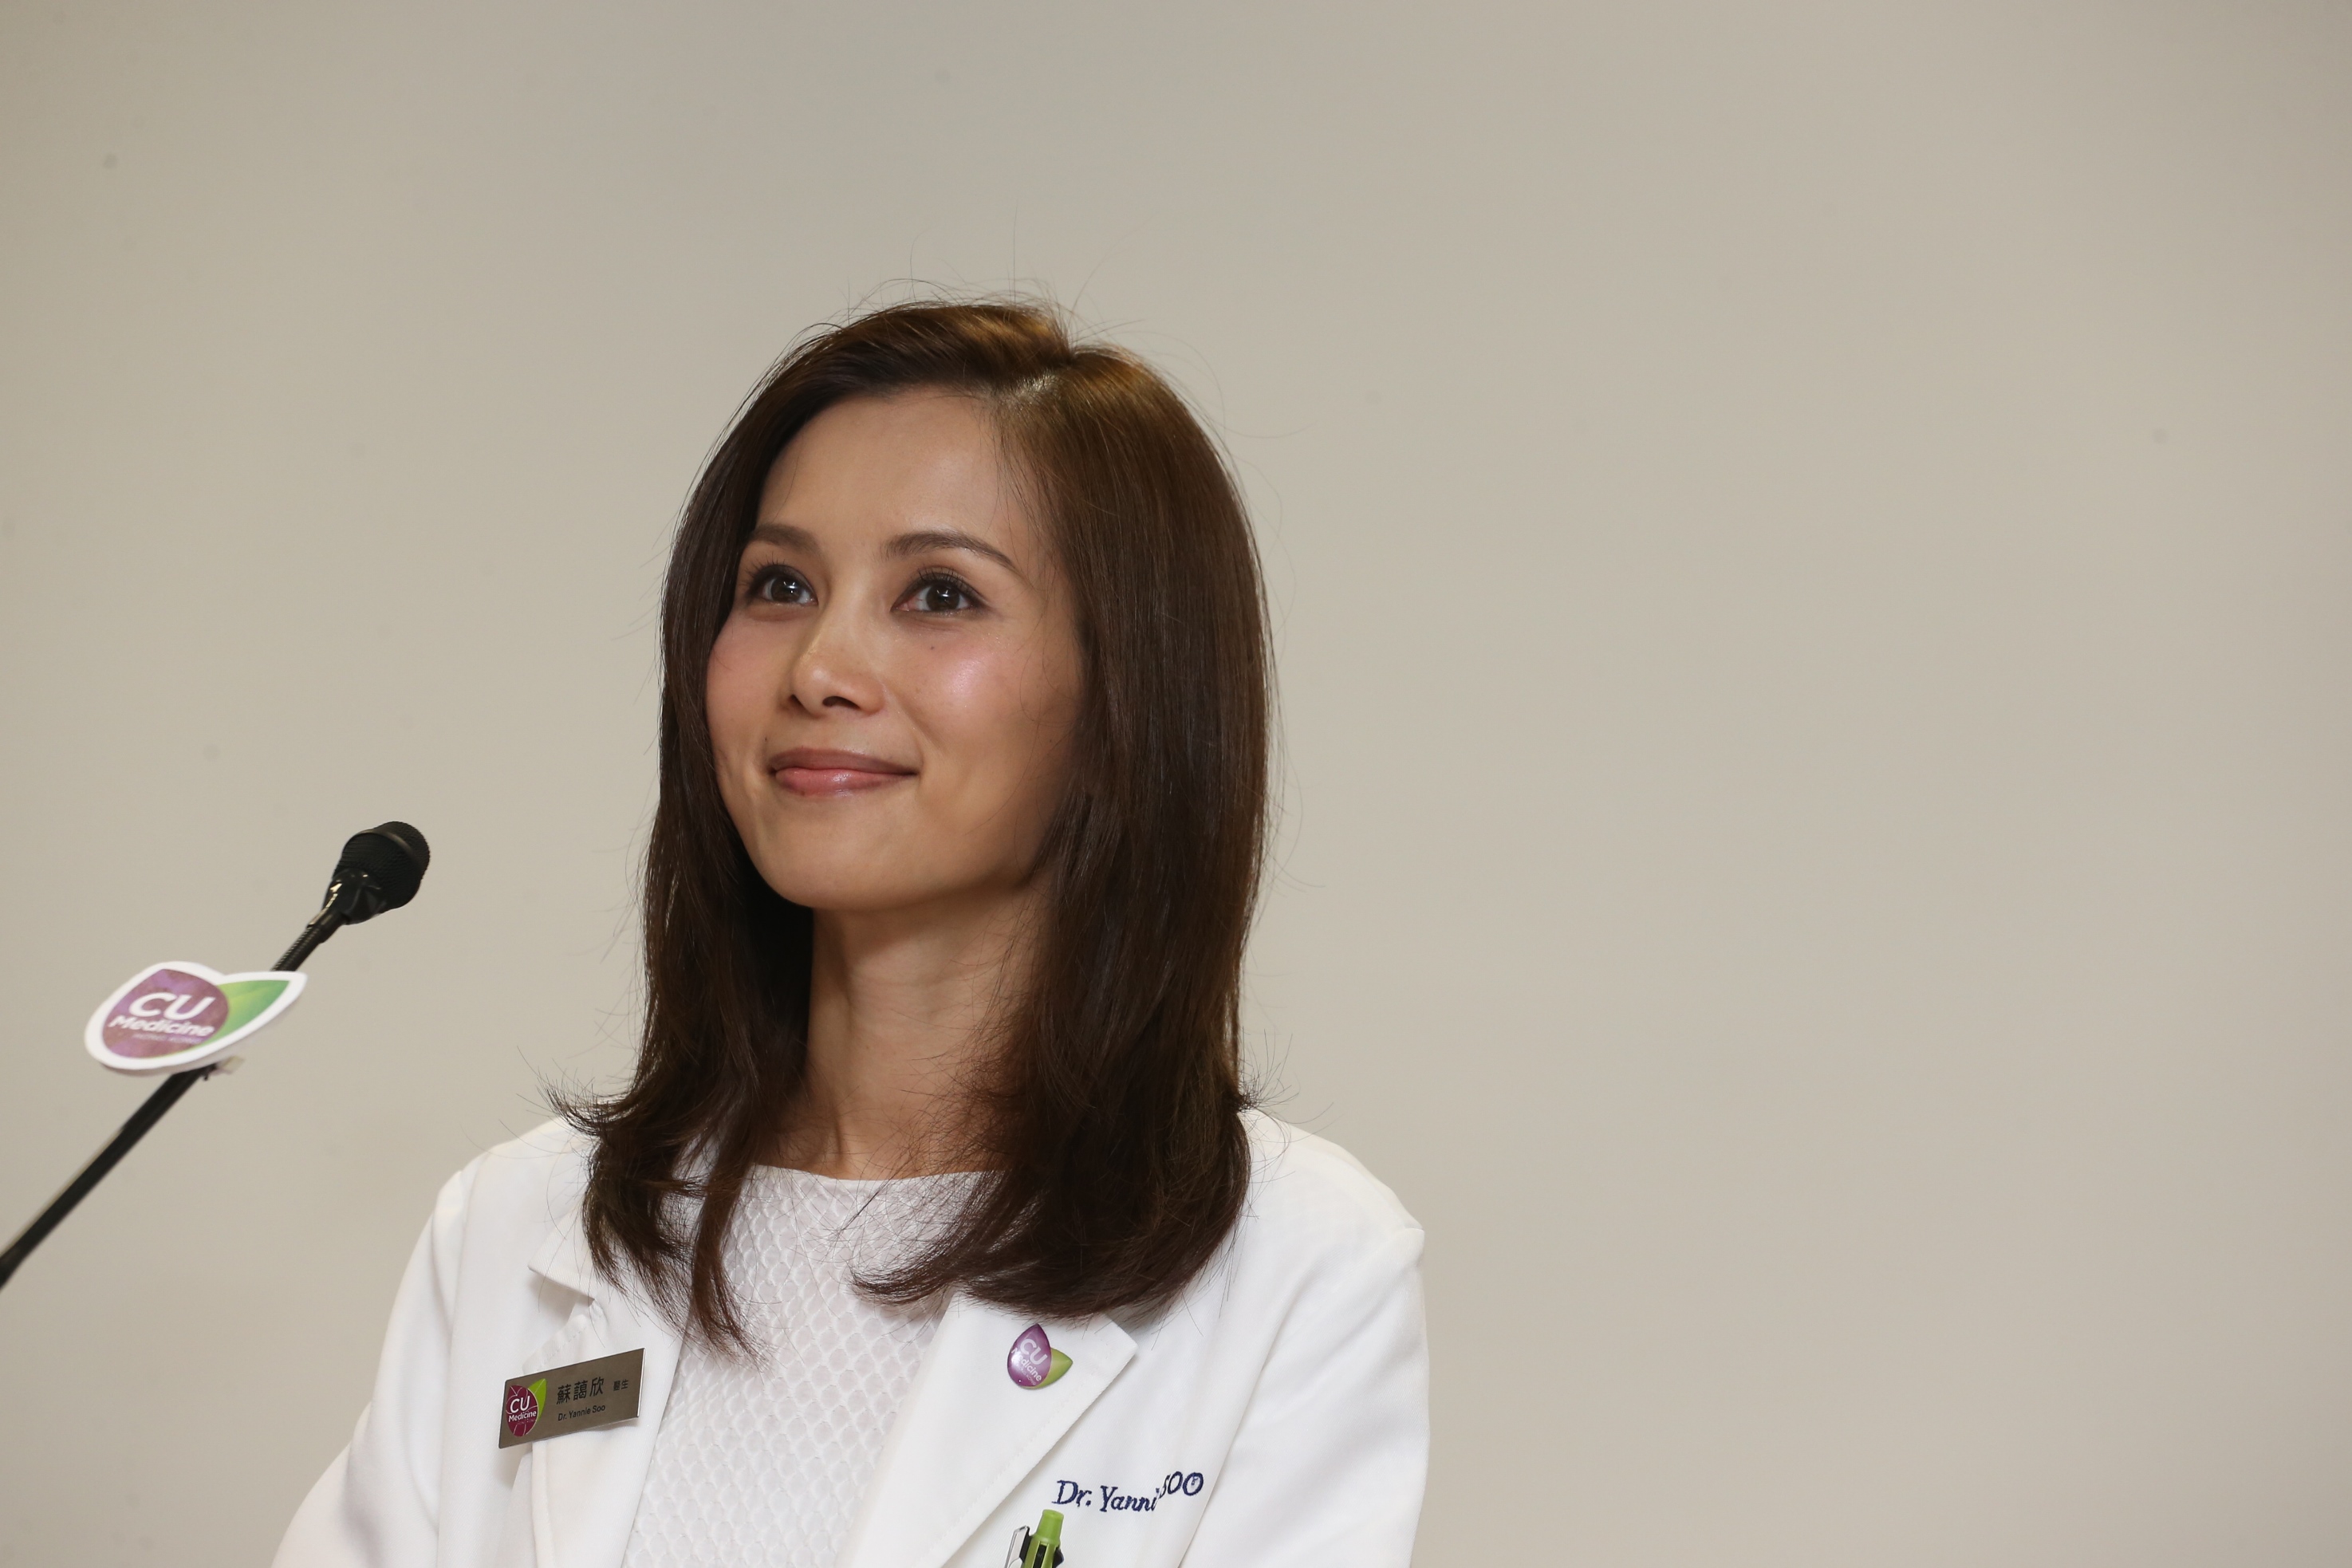 Dr Yannie SOO hopes this study will raise the awareness of the public and local physicians about Atrial Fibrillation (AF)-related stroke, so that appropriate medication can be given to more AF patients and reduce their risk of stroke.